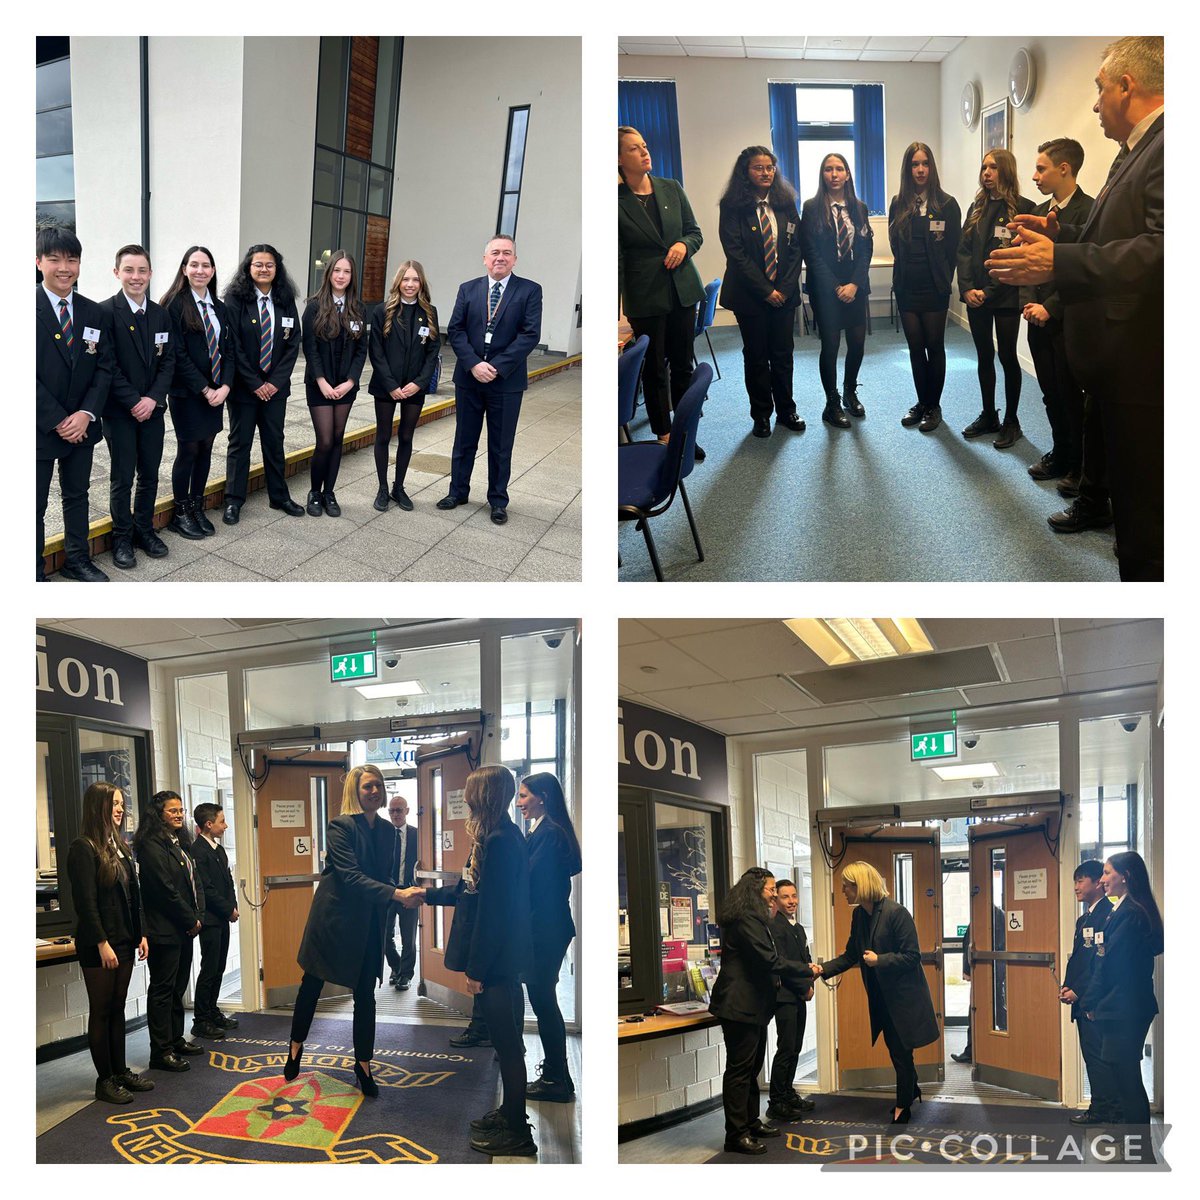 S3 stars showcasing their #Leadership skills and their #Commitment to #Excellence in improving our school #PupilVoice #Equity #SCQFGold Our guests were impressed with their #Knowledge #Engagement #Confidence #Passion @BearsdenAcademy @gfjc41 @76KKelly @BAachievement @lynda_cllr